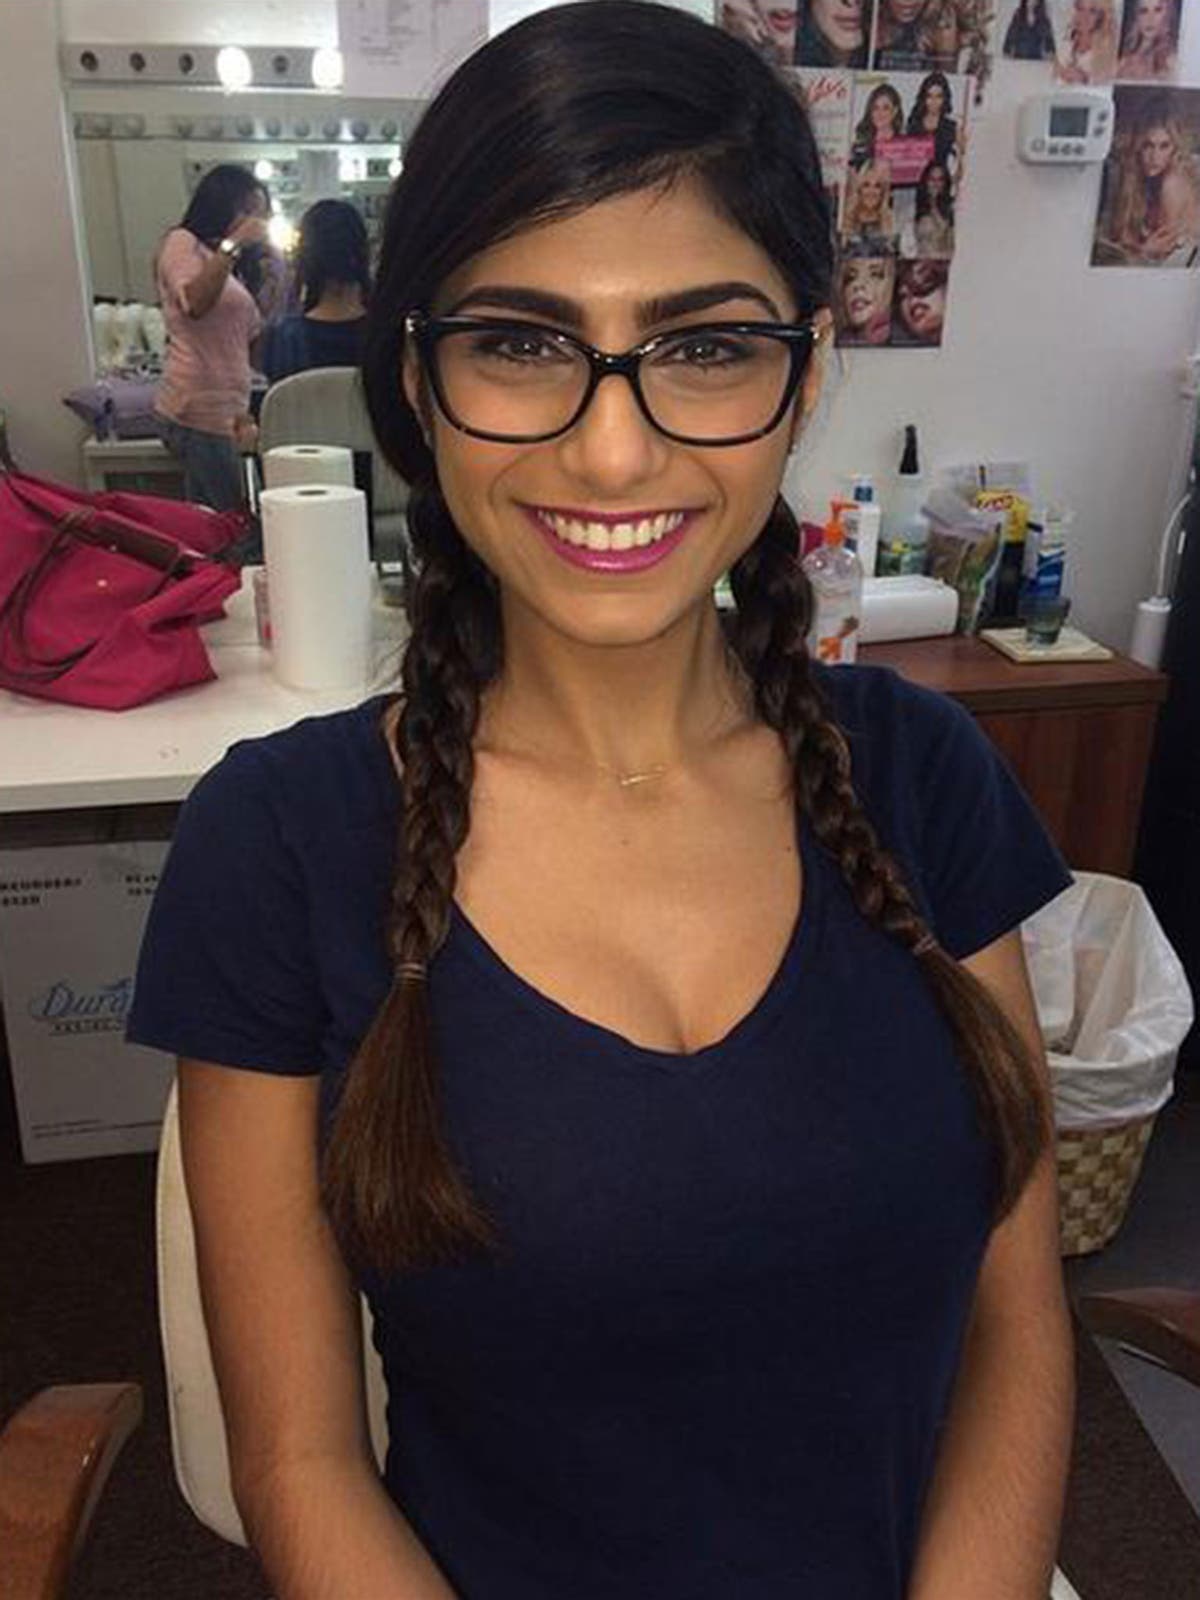 Mia Khalifa Dresh Change - Pornhub star Mia Khalifa receives death threats after being ranked the  site's top adult actress | The Independent | The Independent